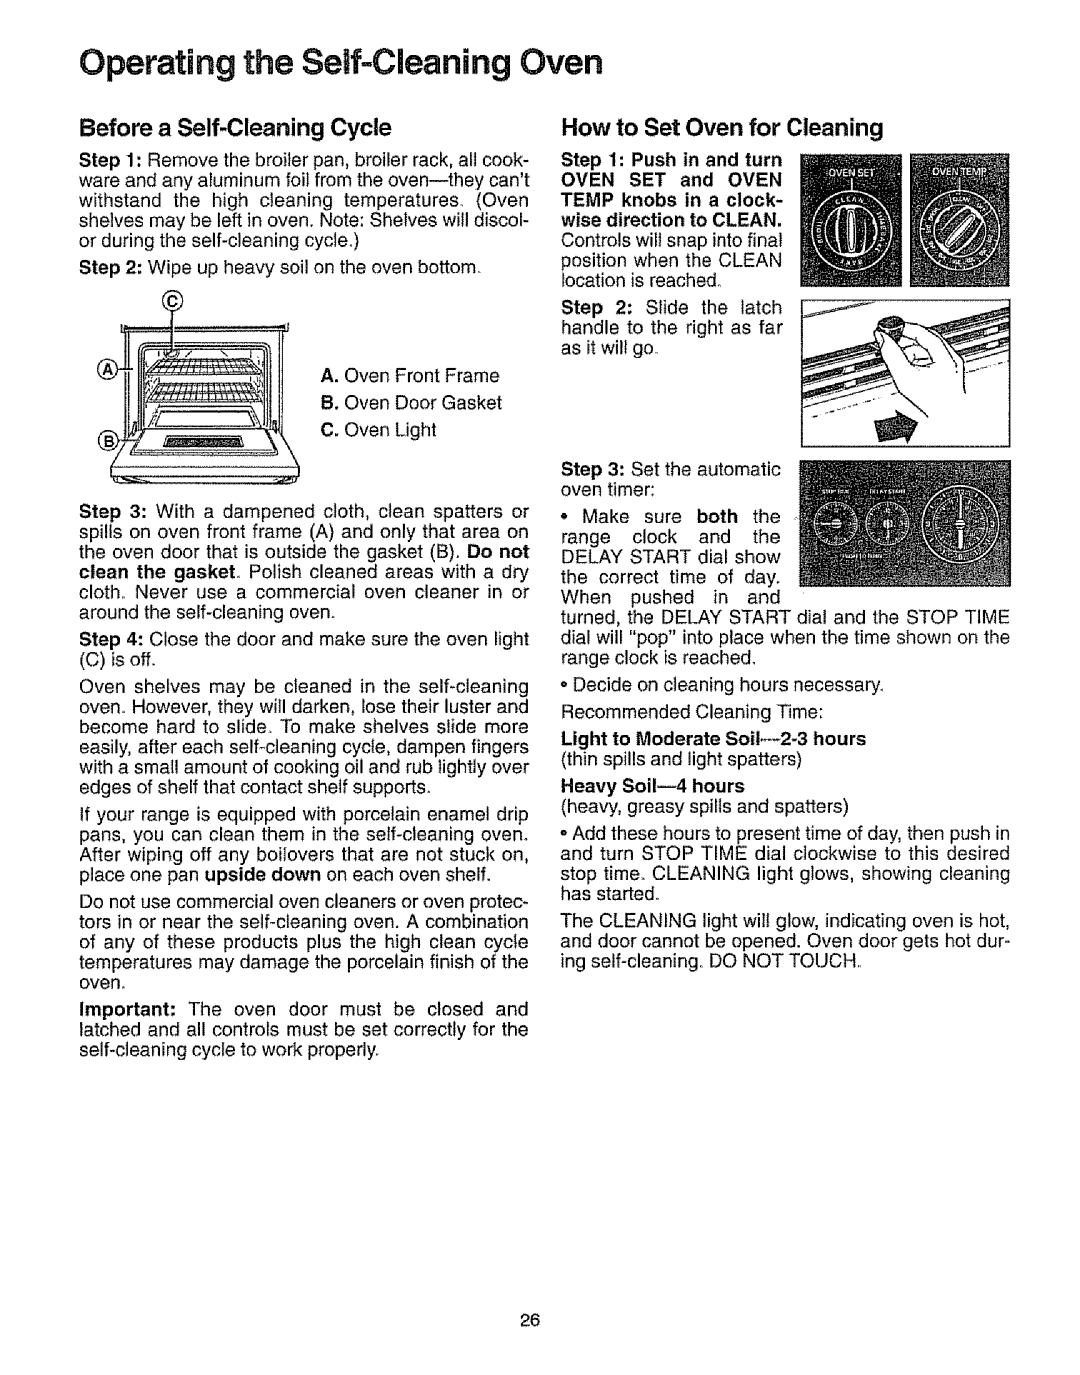 Sears 73311 Operating the Self-Cleaning Oven, Before a Self-Cleaning Cycle, How to Set Oven for Cleaning, Push in and turn 